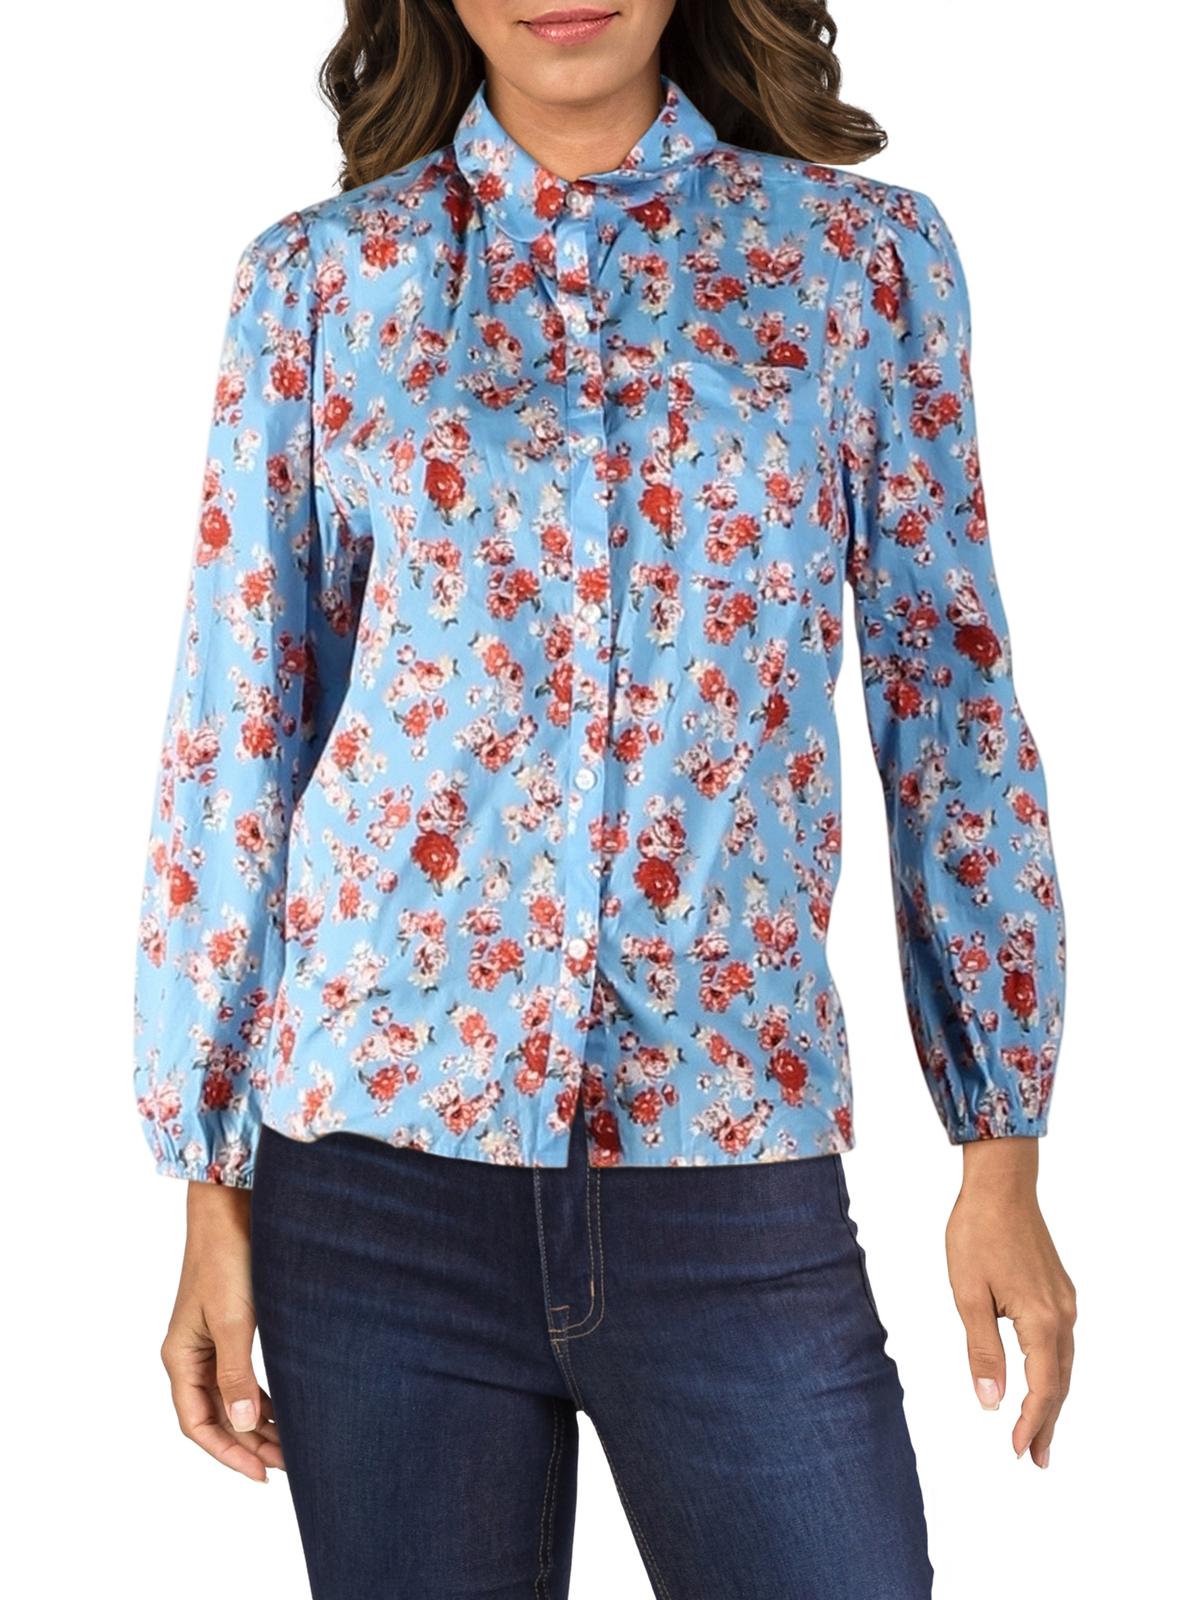 Lucky Brand Womens Poet Floral Print Collar Button-Down Top Blue XL - image 1 of 3